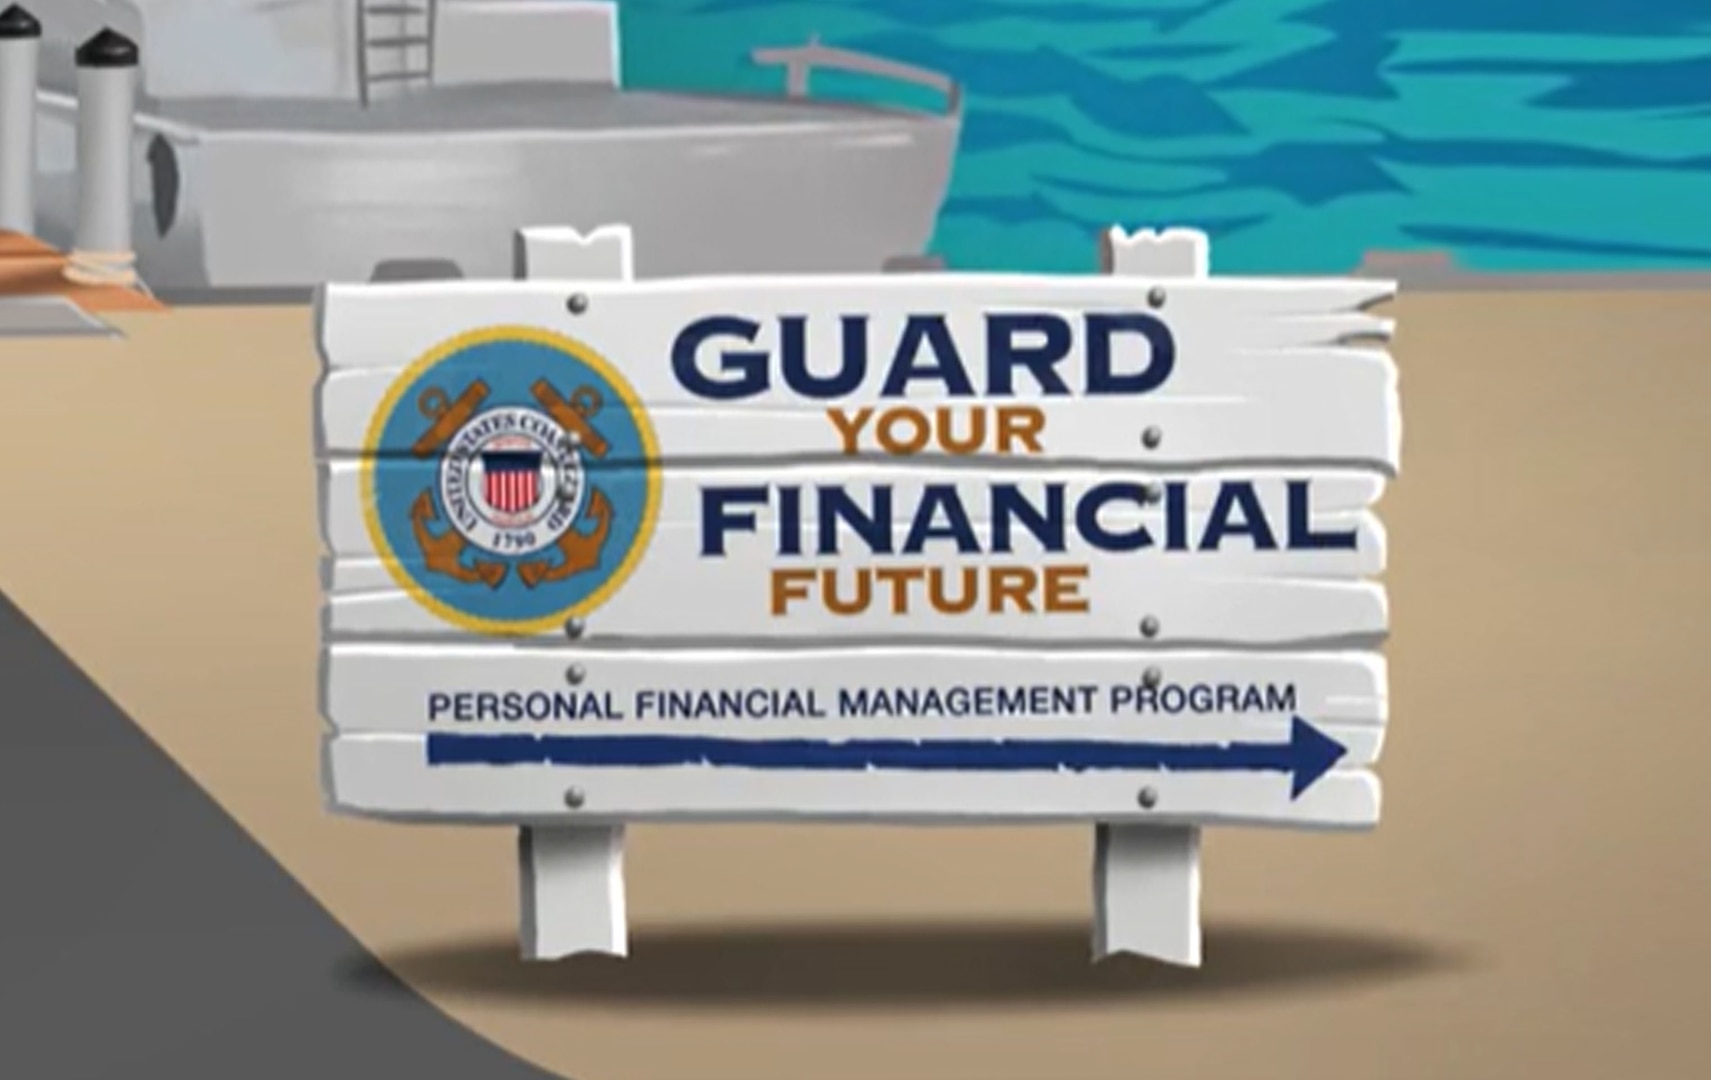 A graphic representation of a dock with a boat in the background right off the waters edge there is an old board sign that says "Guard your financial future" it also has a Coast Guard logo on the sign.